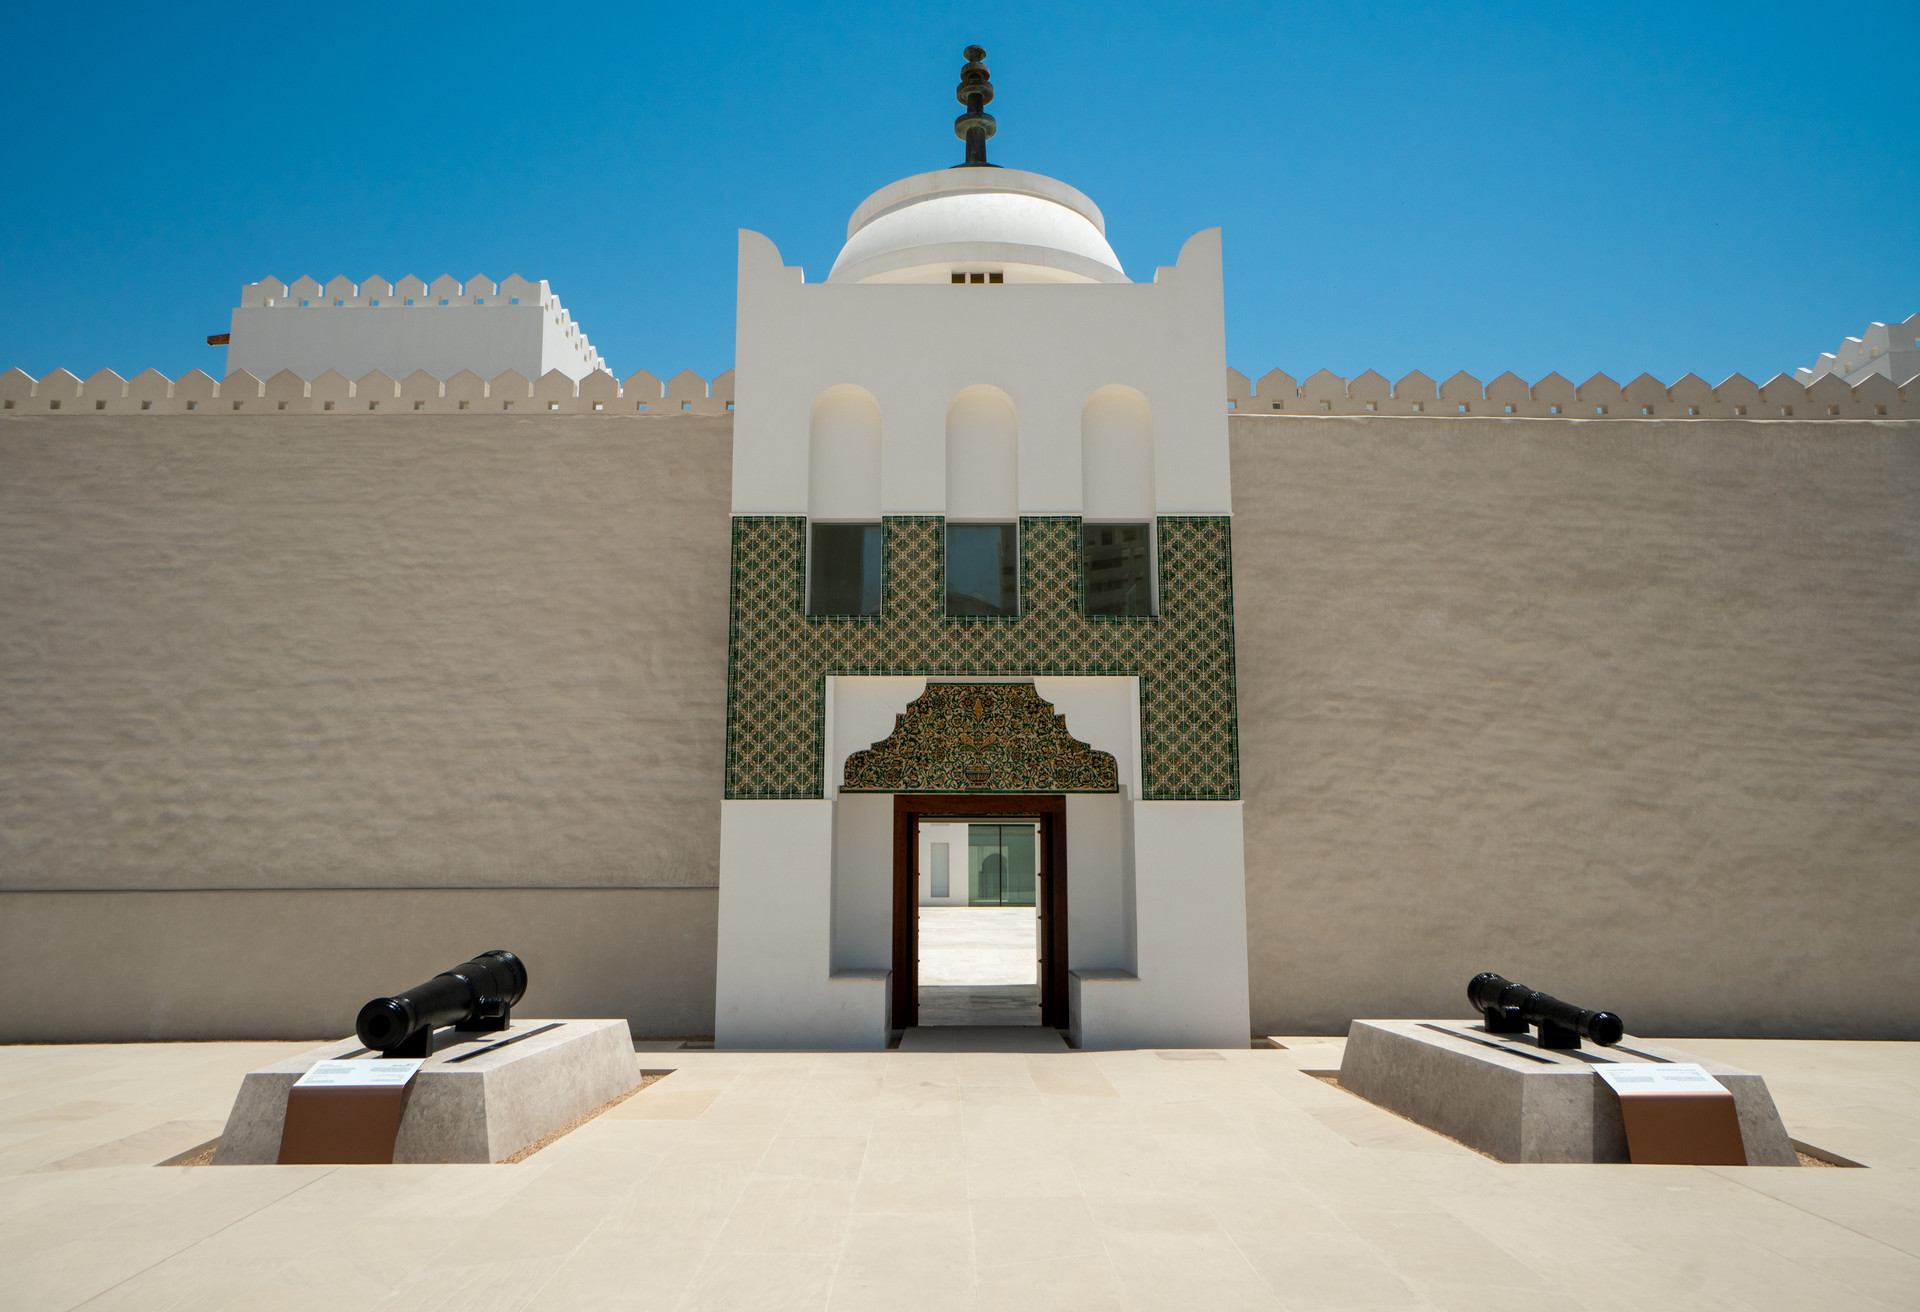 In the city Abu Dhabi there's more to see than just the Grand Mosque. The Qasr Al Hosn is a good example for another impressive sight in the city.